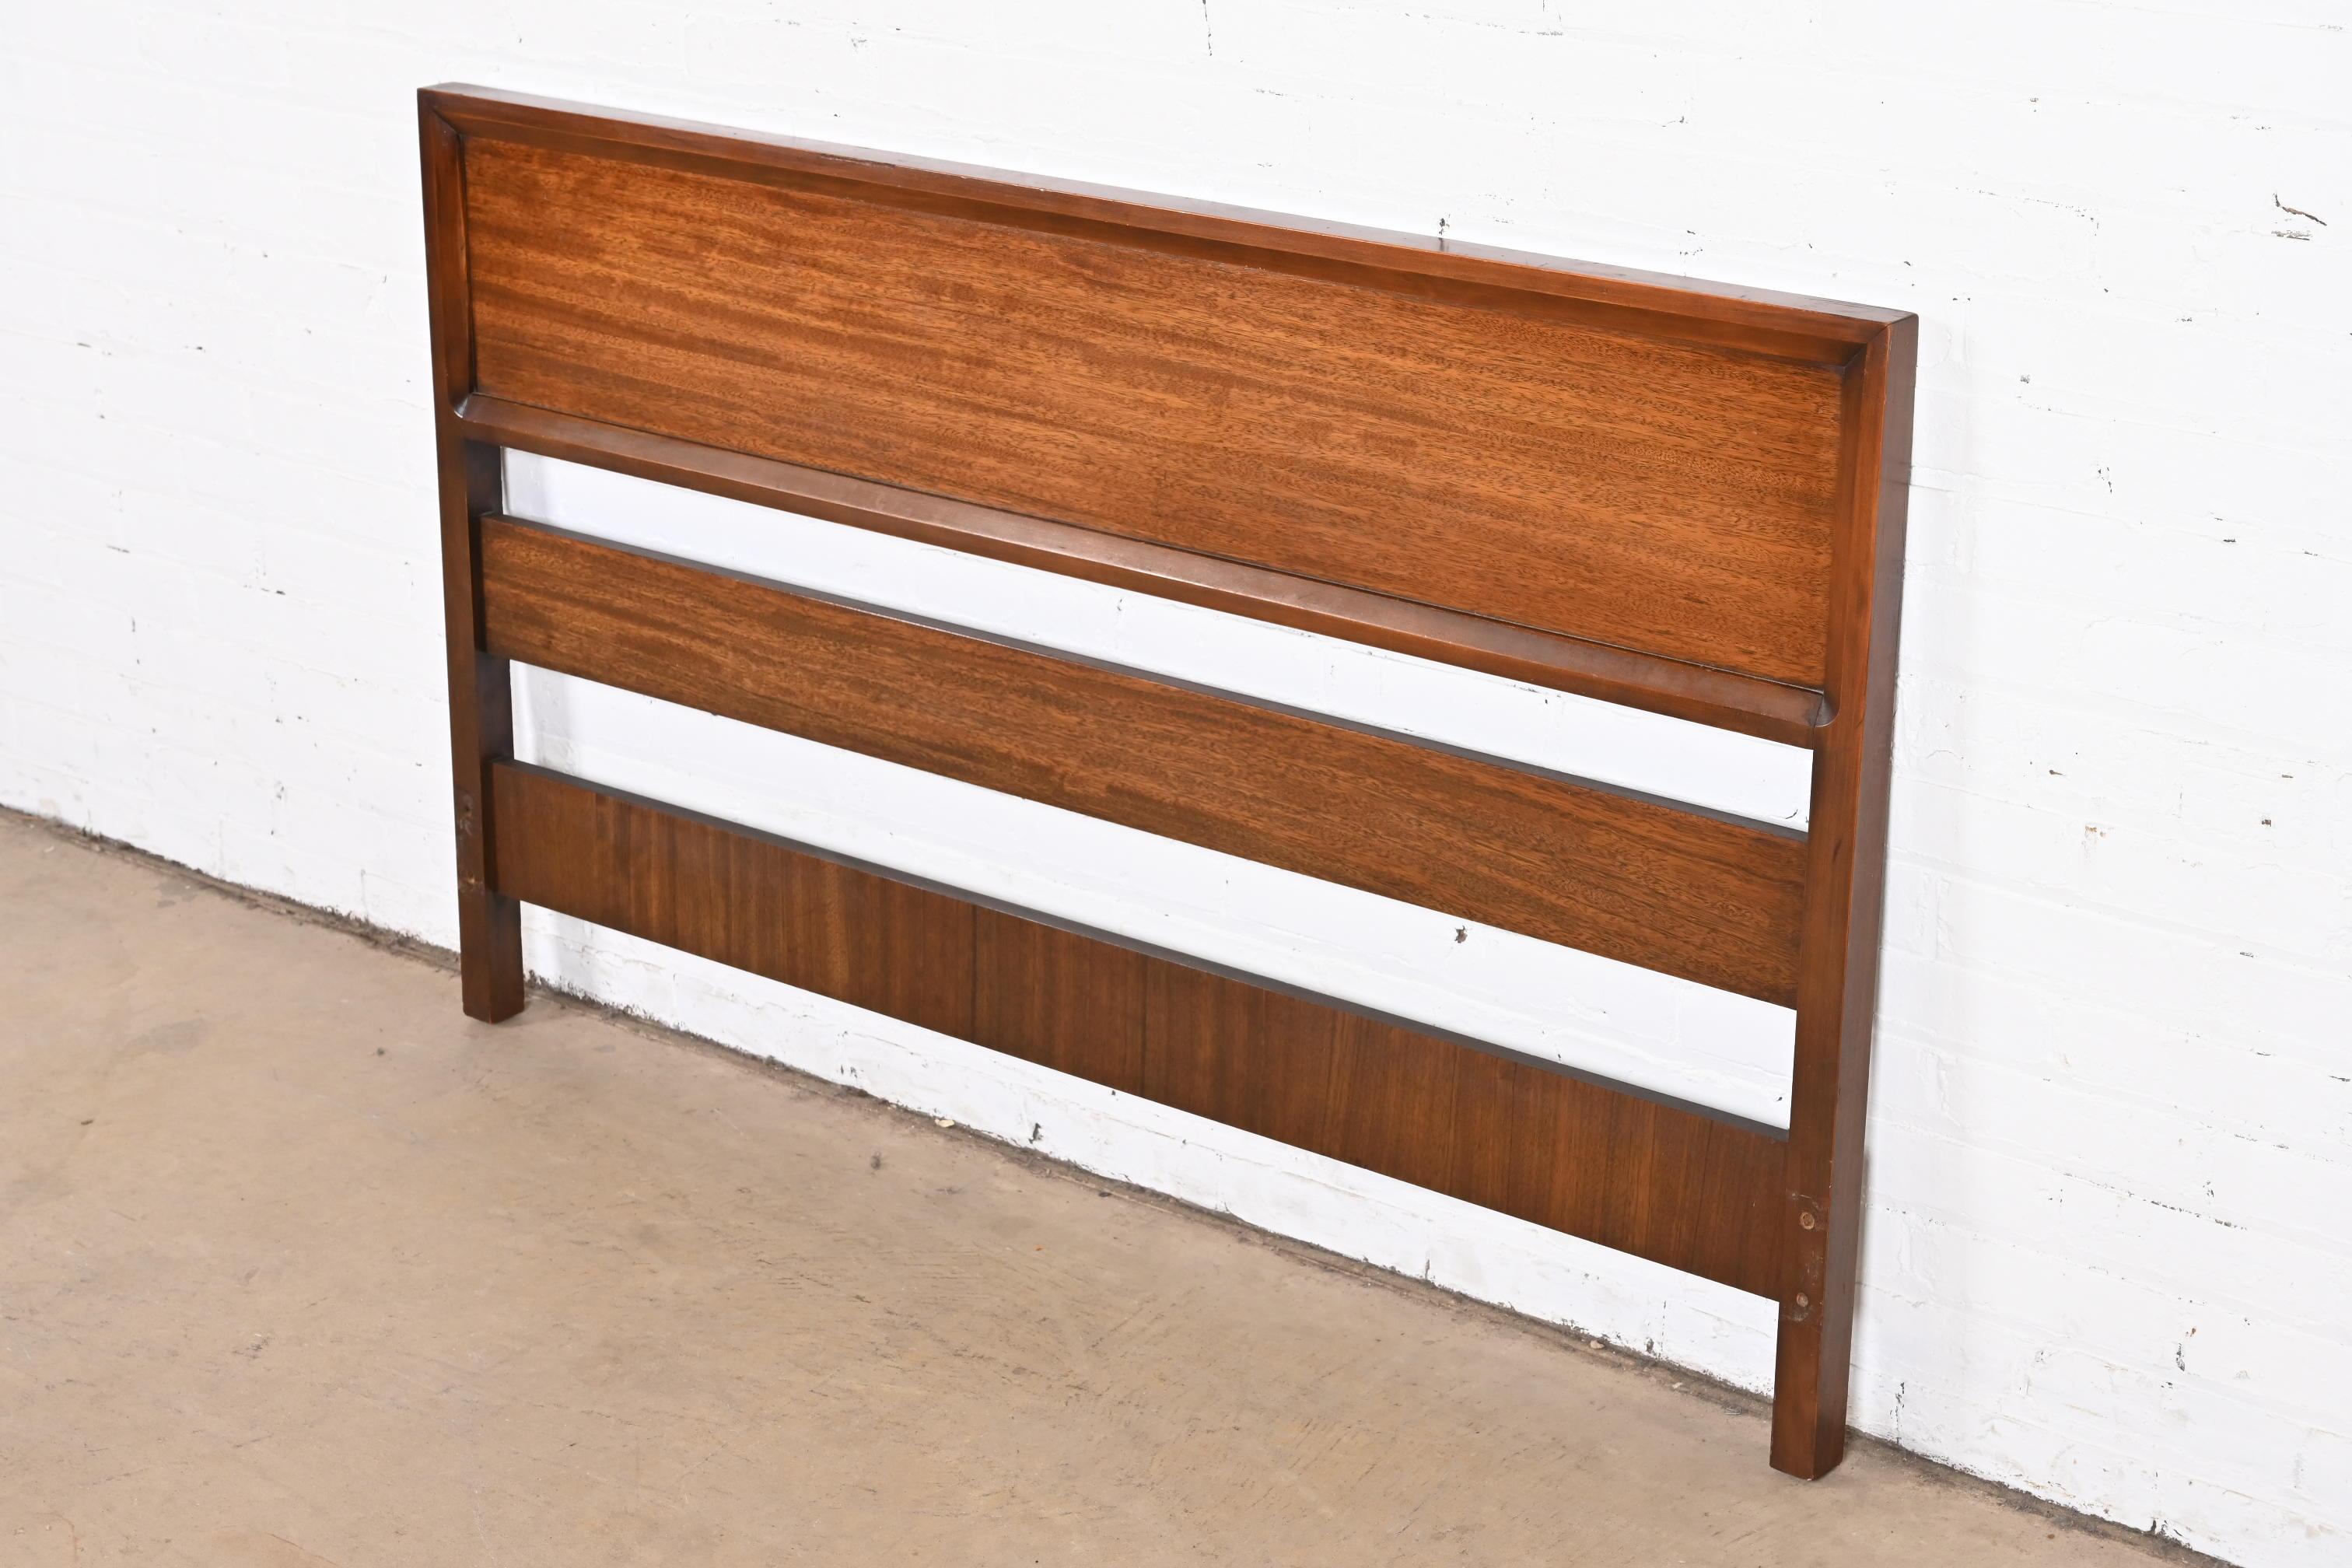 A gorgeous Mid-Century Modern full size headboard in exotic Mindoro wood

By Milo Baughman for Drexel, 